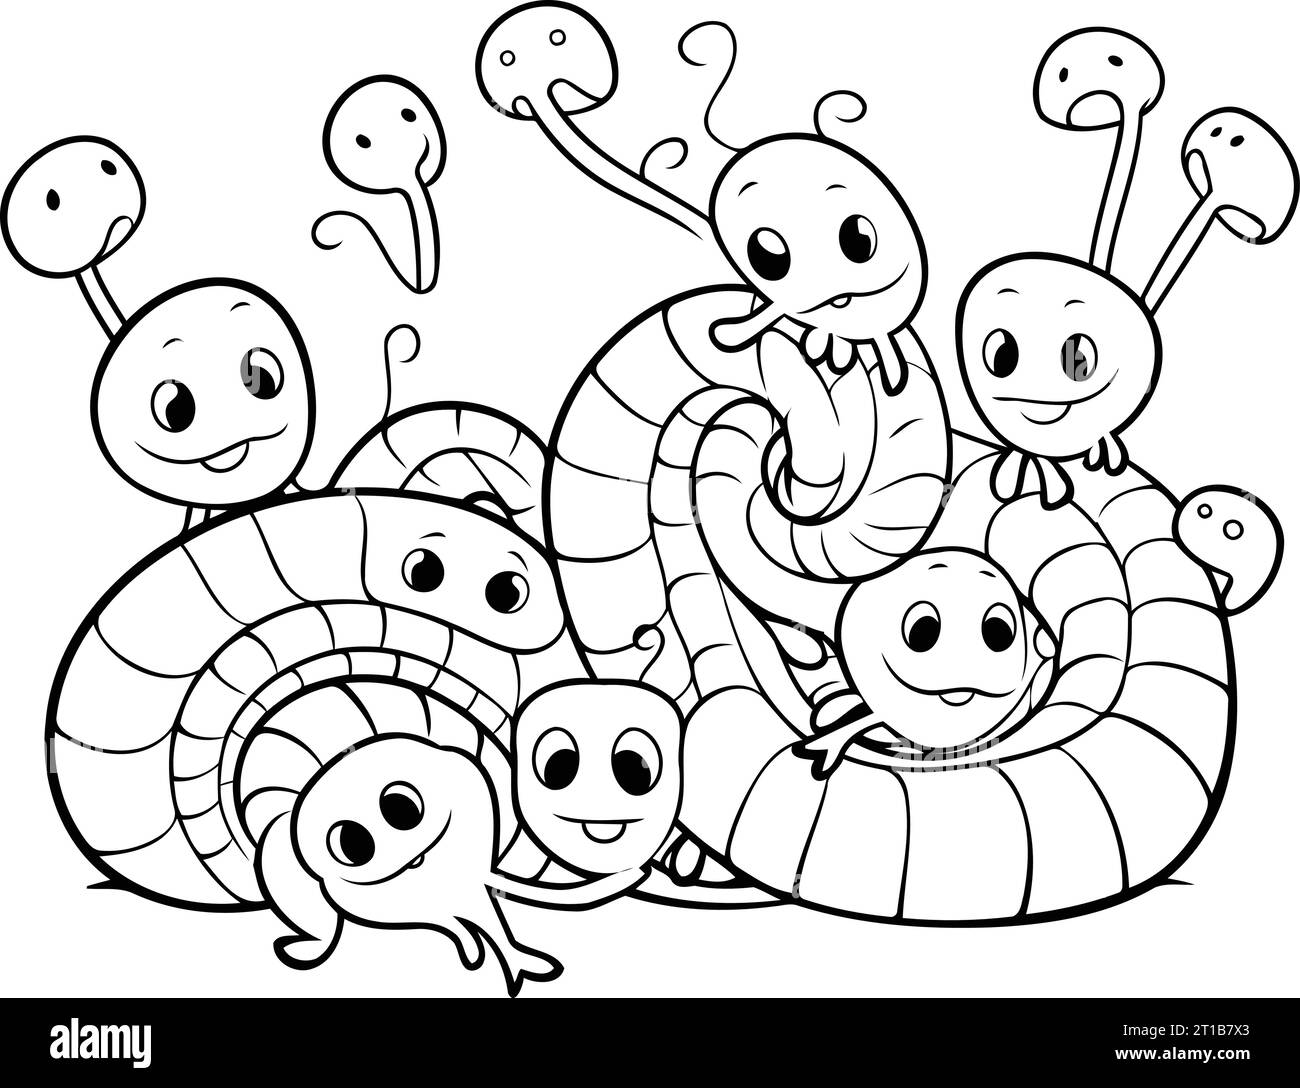 Black and white vector illustration of a group of funny cartoon caterpillars. Stock Vector